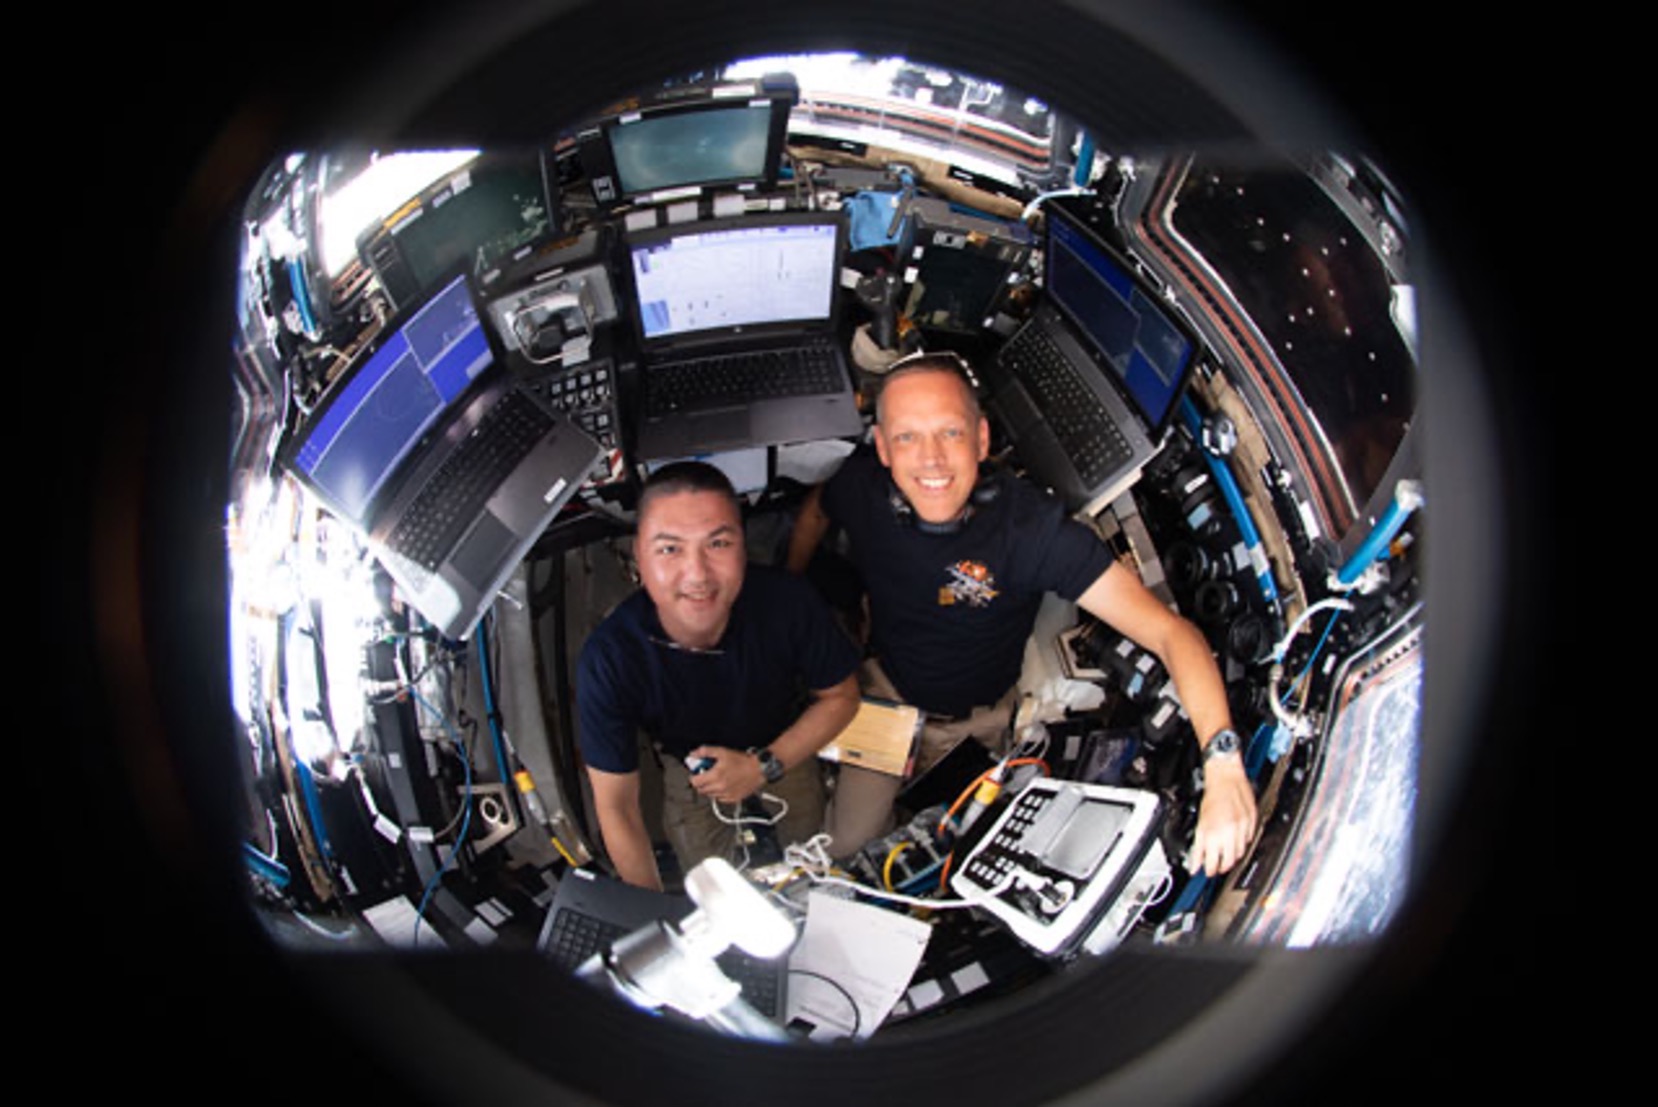 NASA astronauts Kjell Lindgren and Bob Hines are pictured inside the International Space Station's seven-windowed cupola monitoring the approach and rendezvous of Boeing's CST-100 Starliner spacecraft on the company's Orbital Flight Test-2 mission.